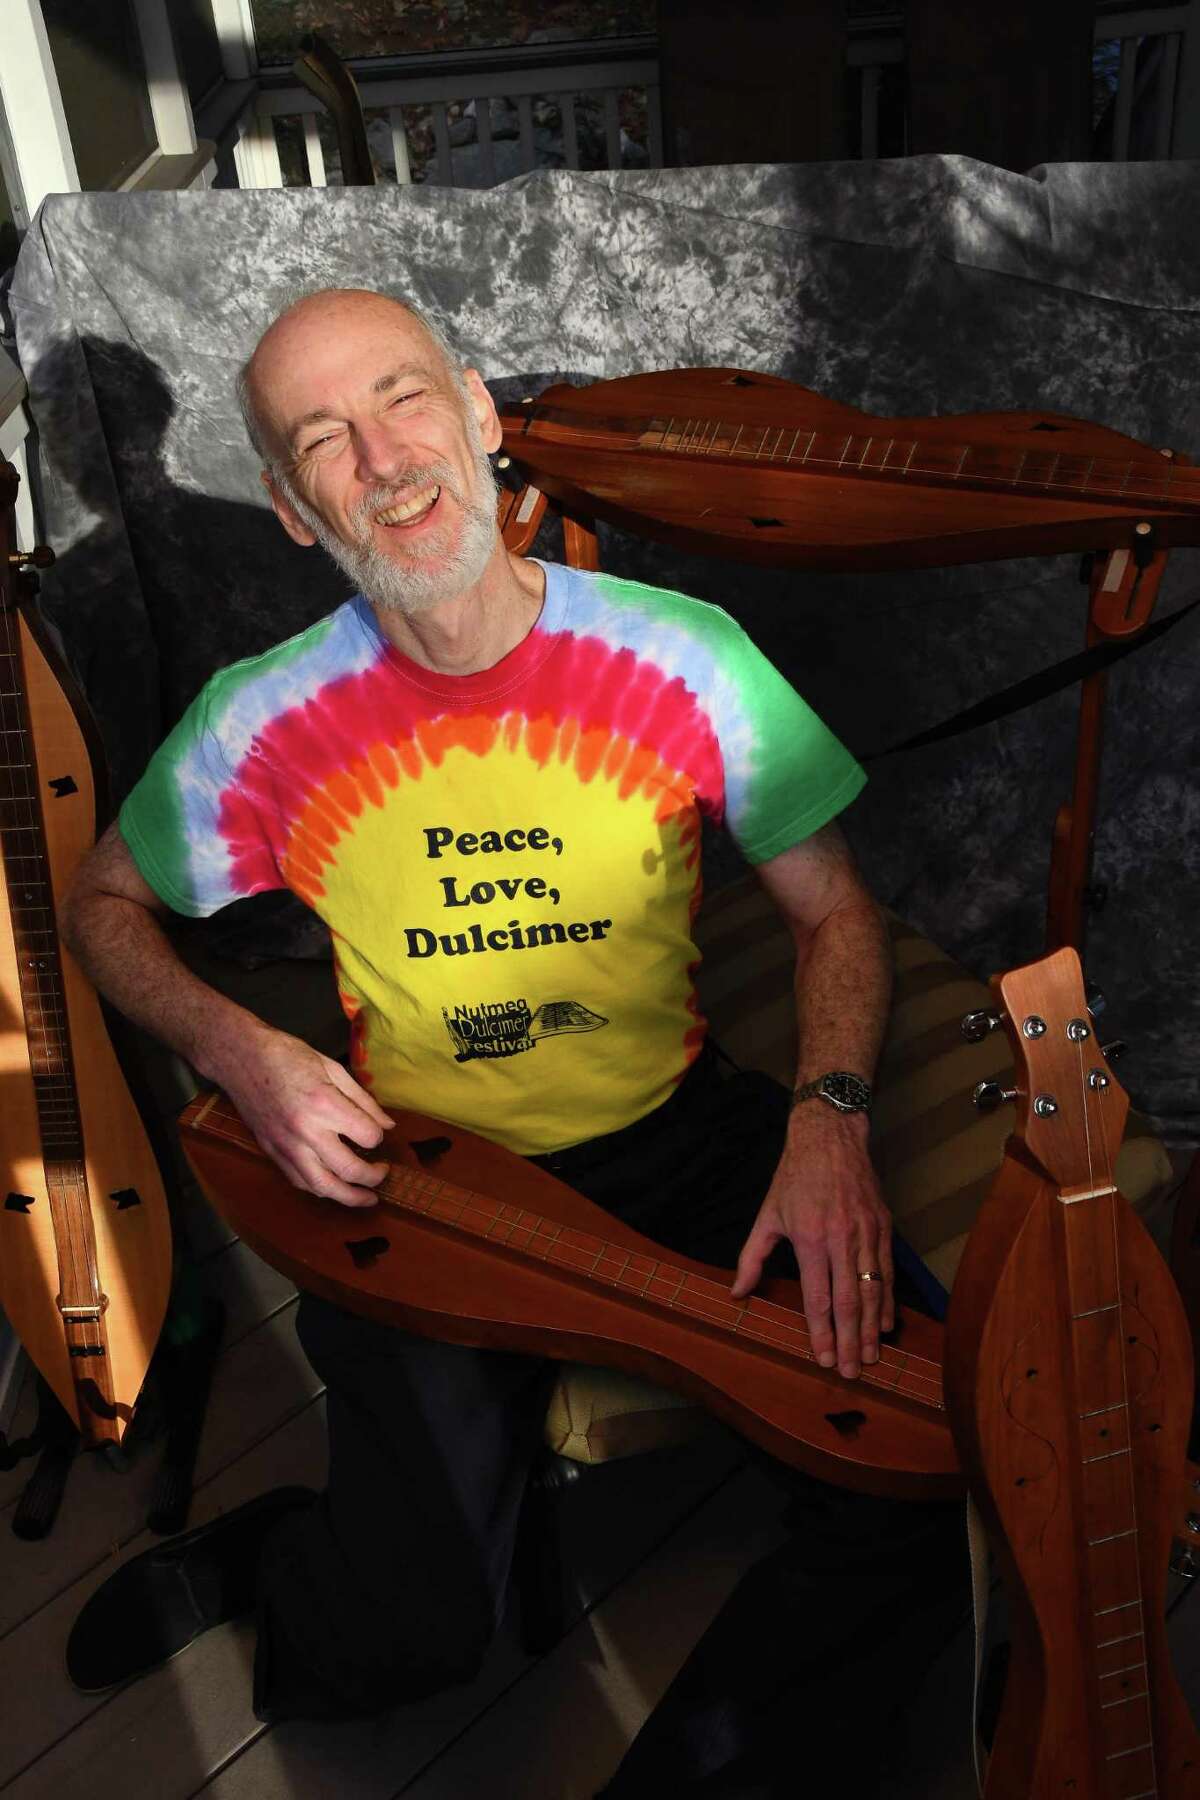 Wearing one of his favorite shirts, Sam Edelston sings and plays one of his many dulcimers.